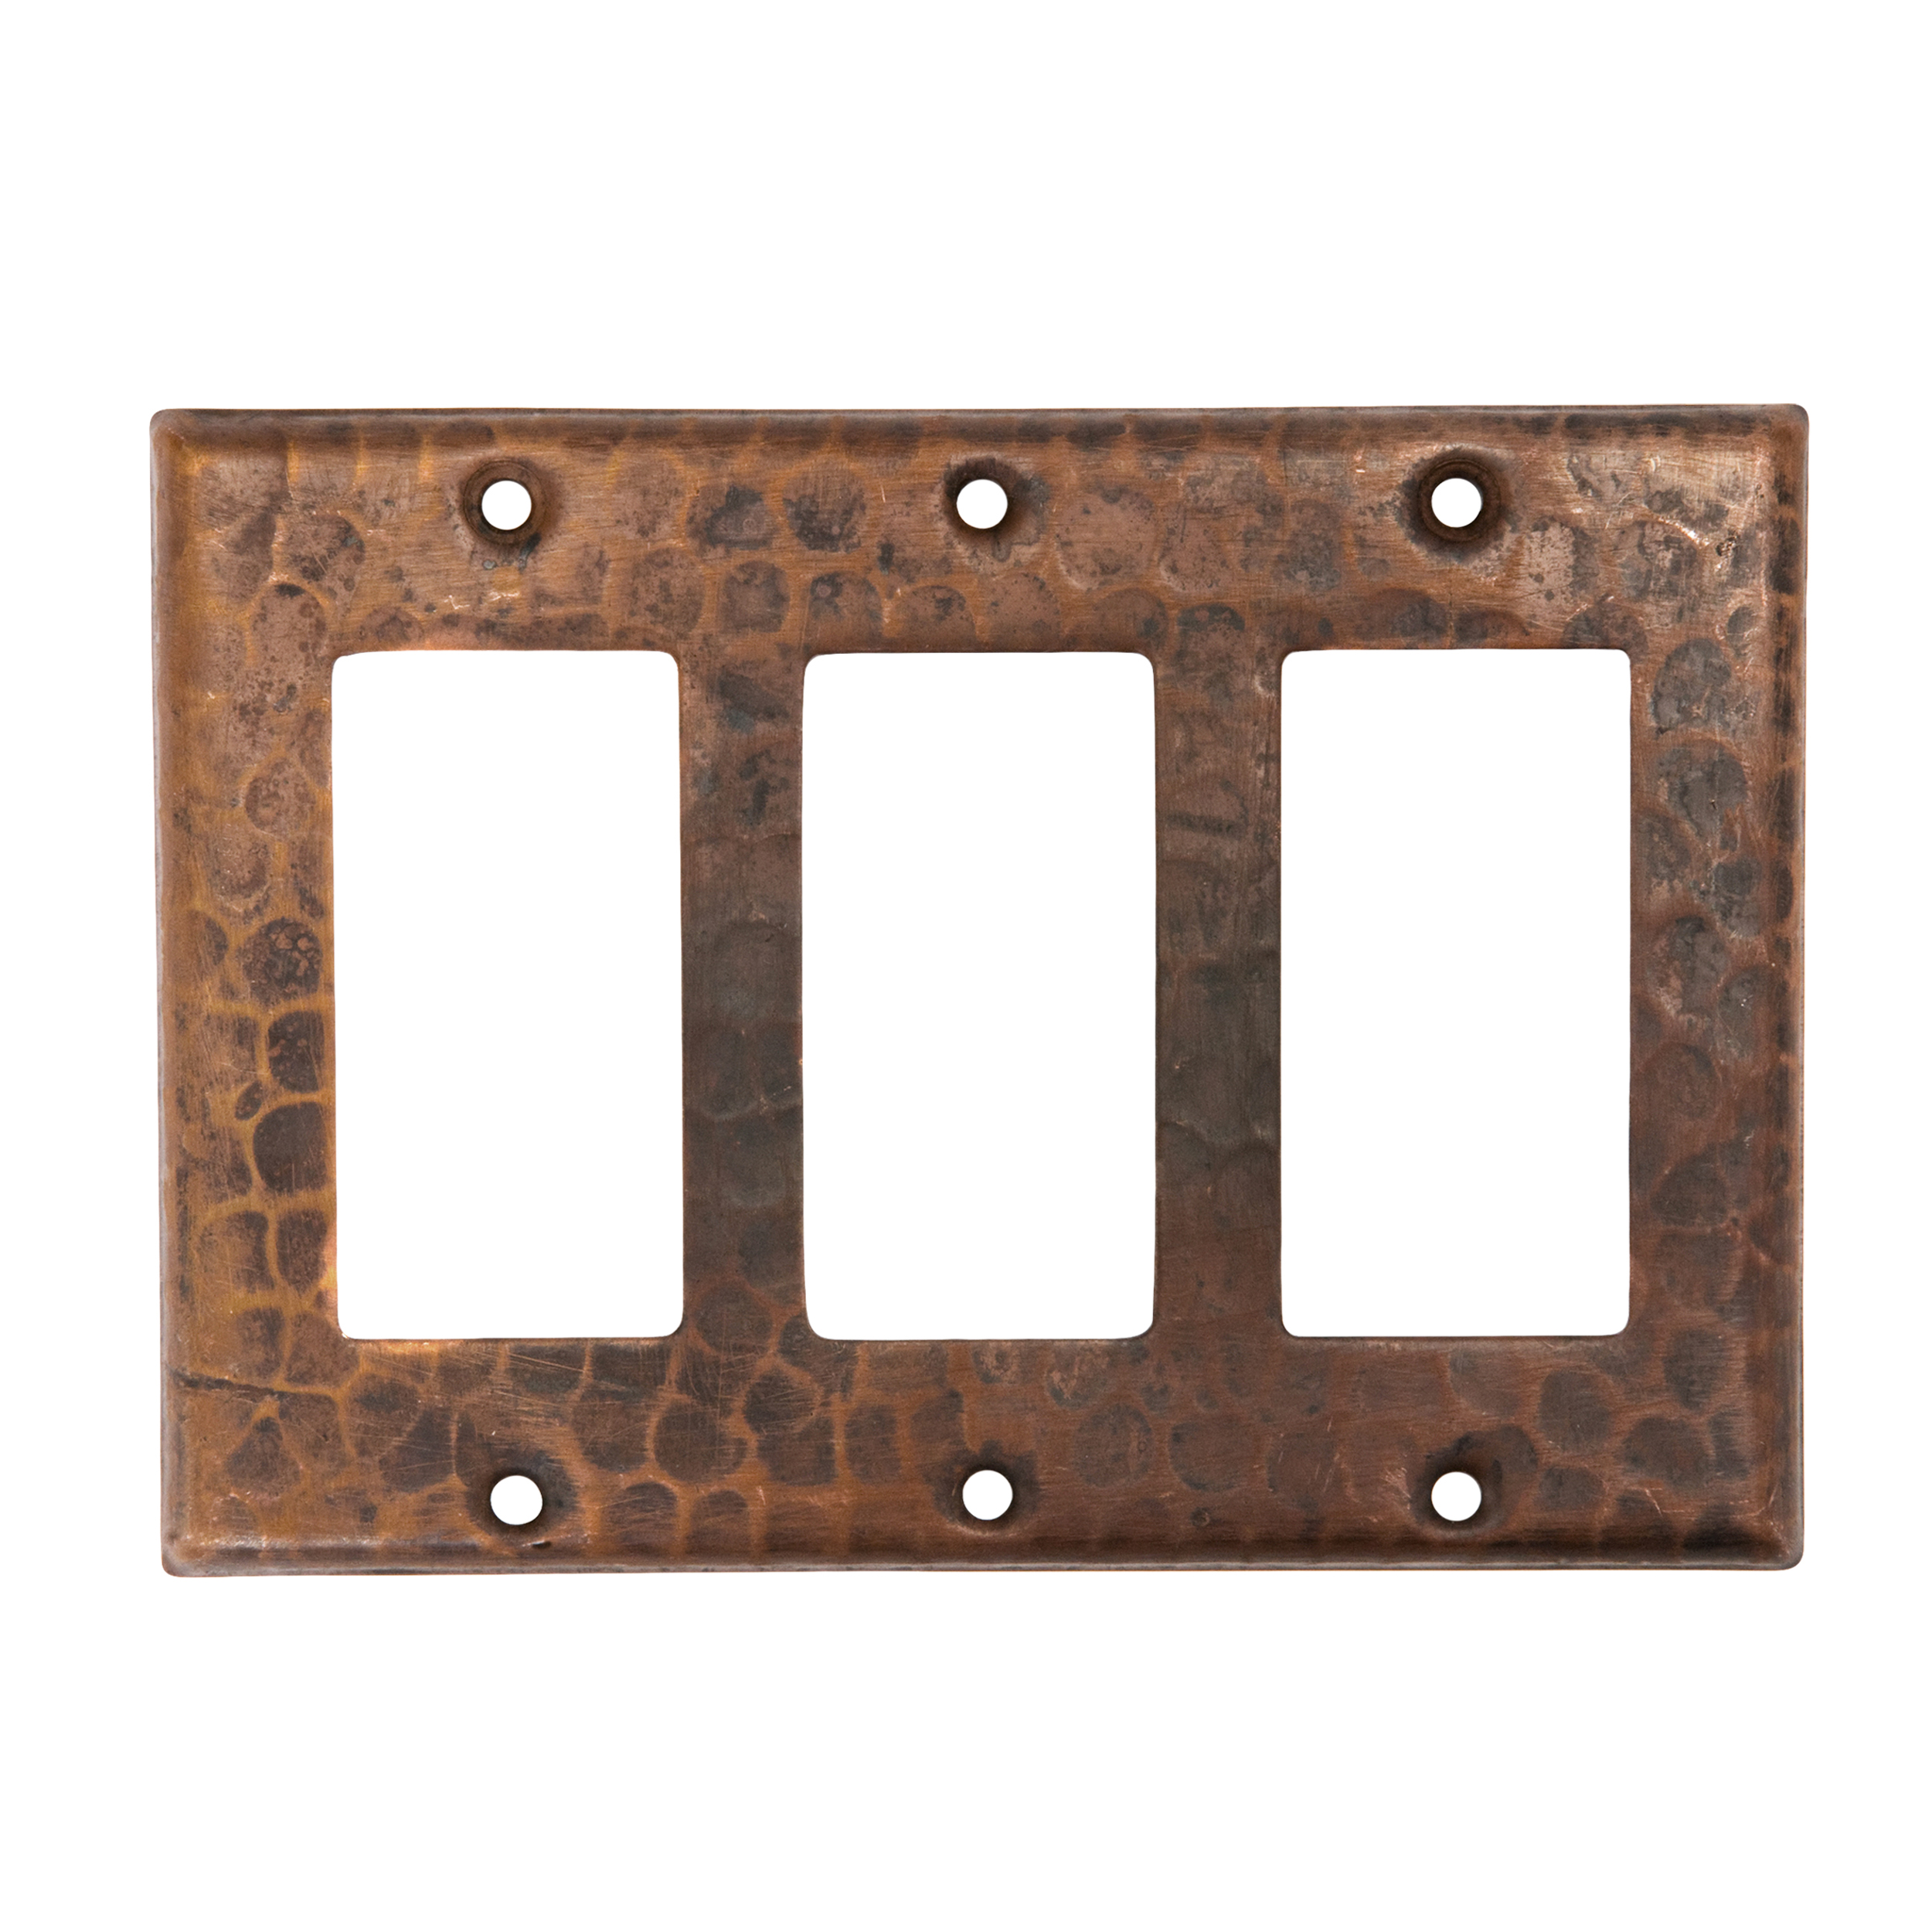 Triple Ground Fault / Rocker Gfi Switchplate Cover